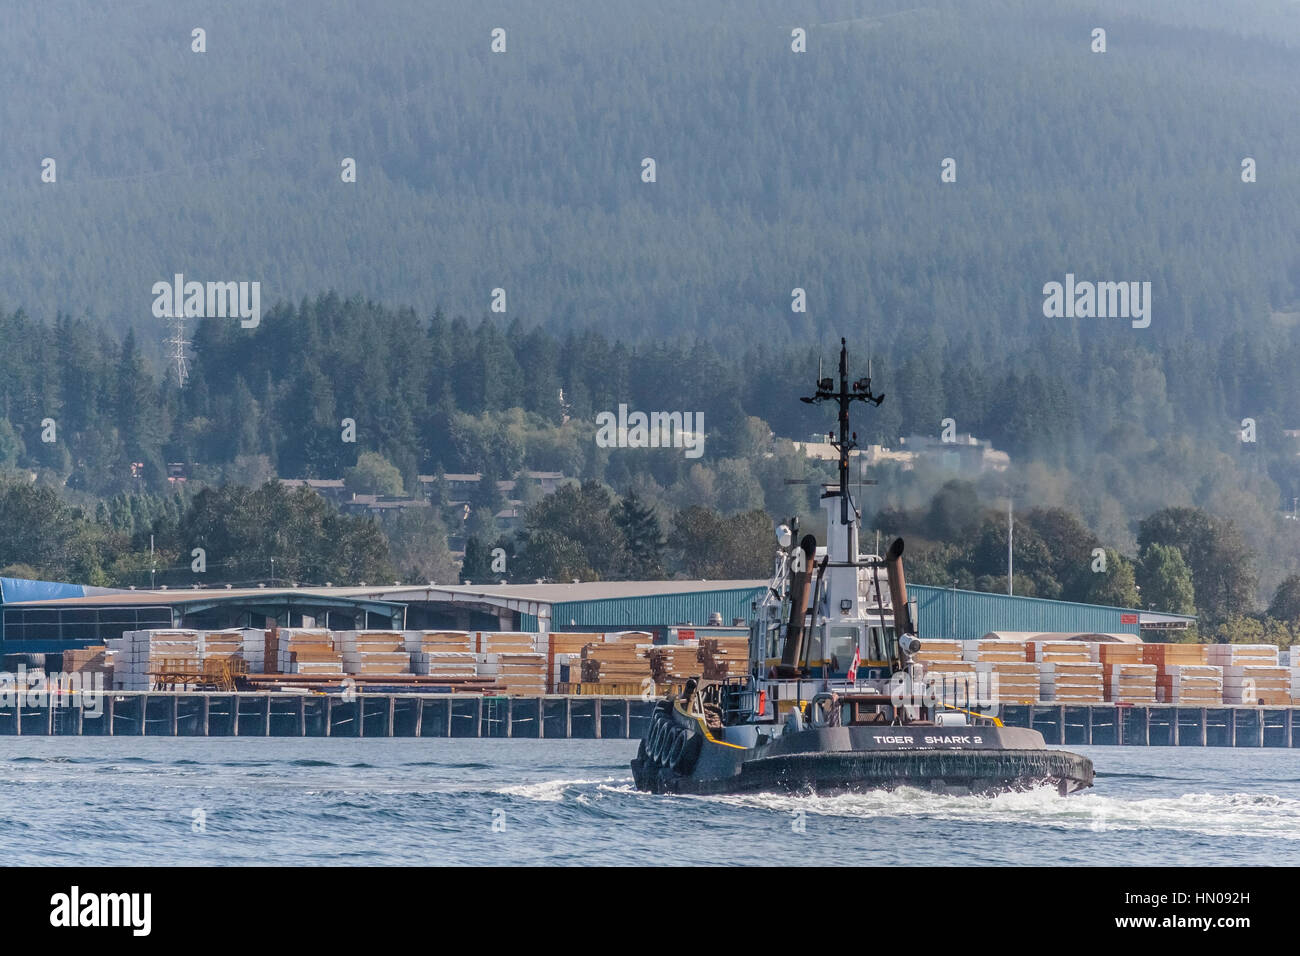 The tugboat 'Tiger Shark 2' is underway towards a shipping terminal wharf that is stacked with lumber, with North Vancouver in the background. Stock Photo